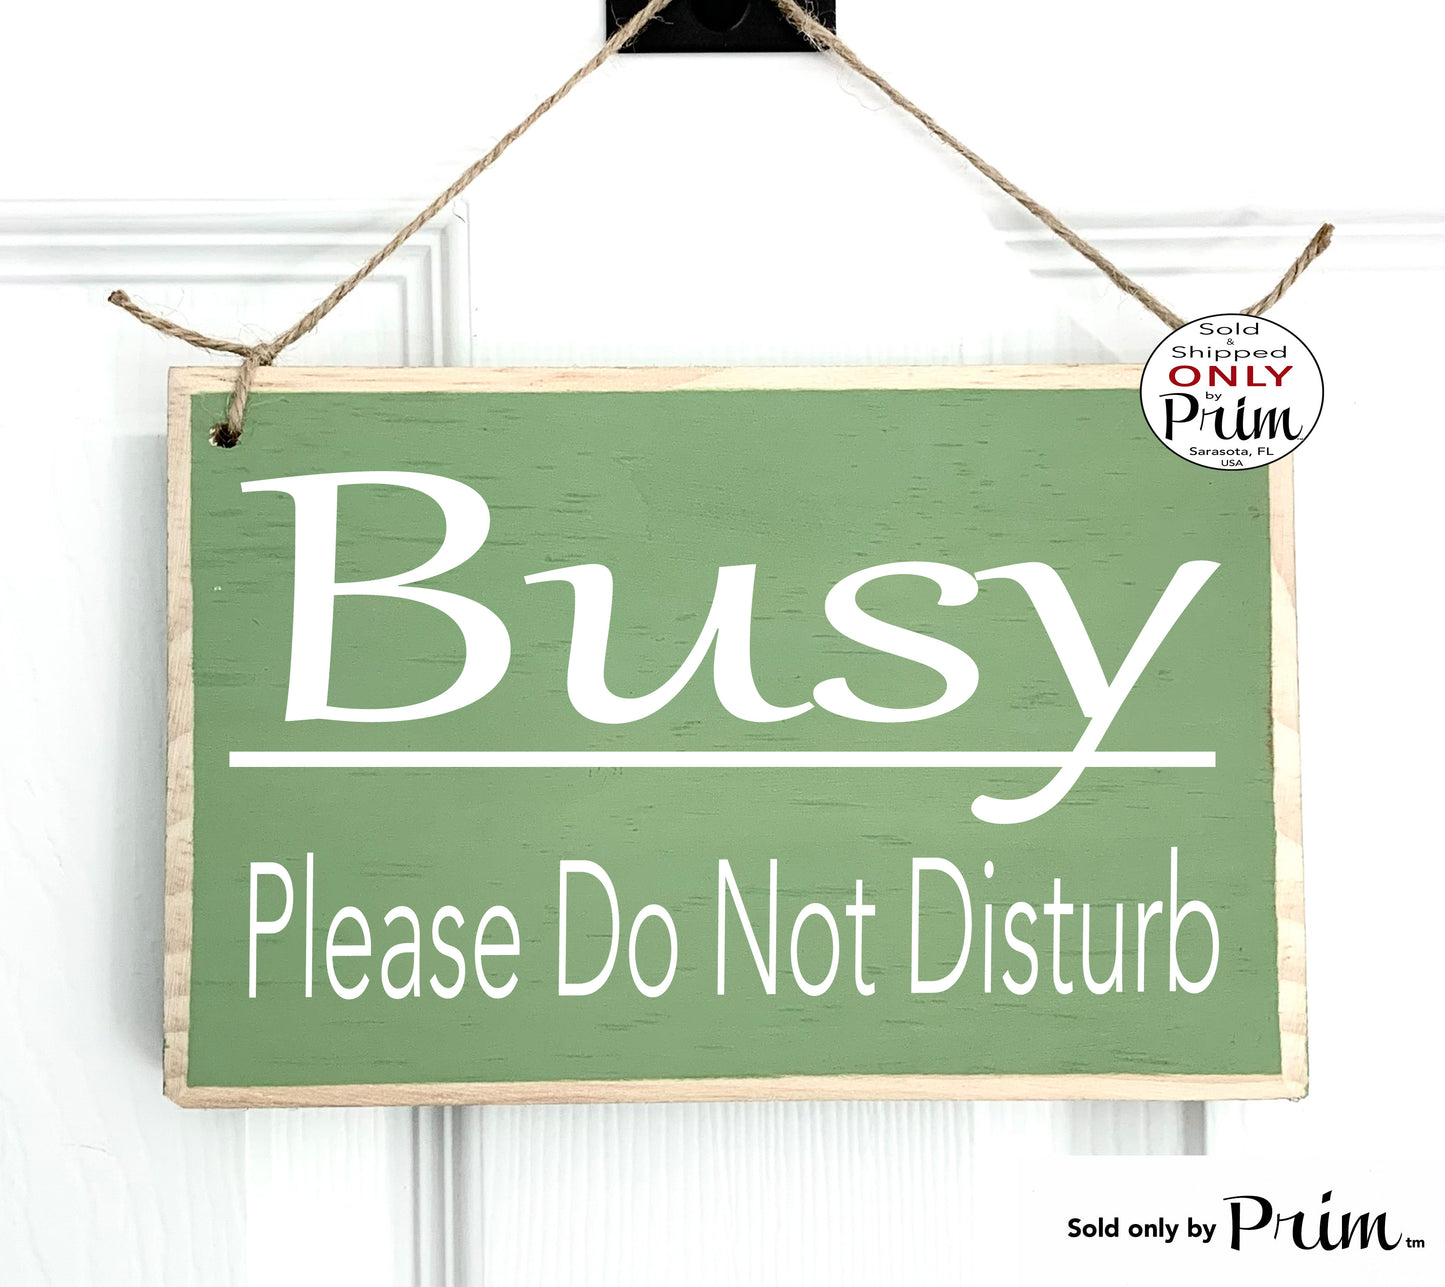 Designs by Prim 8x6 Busy Please Do Not Disturb Custom Wood Sign Focus Time Work Virtual Meetings Progress Home Office Working From Home Session Door Plaque